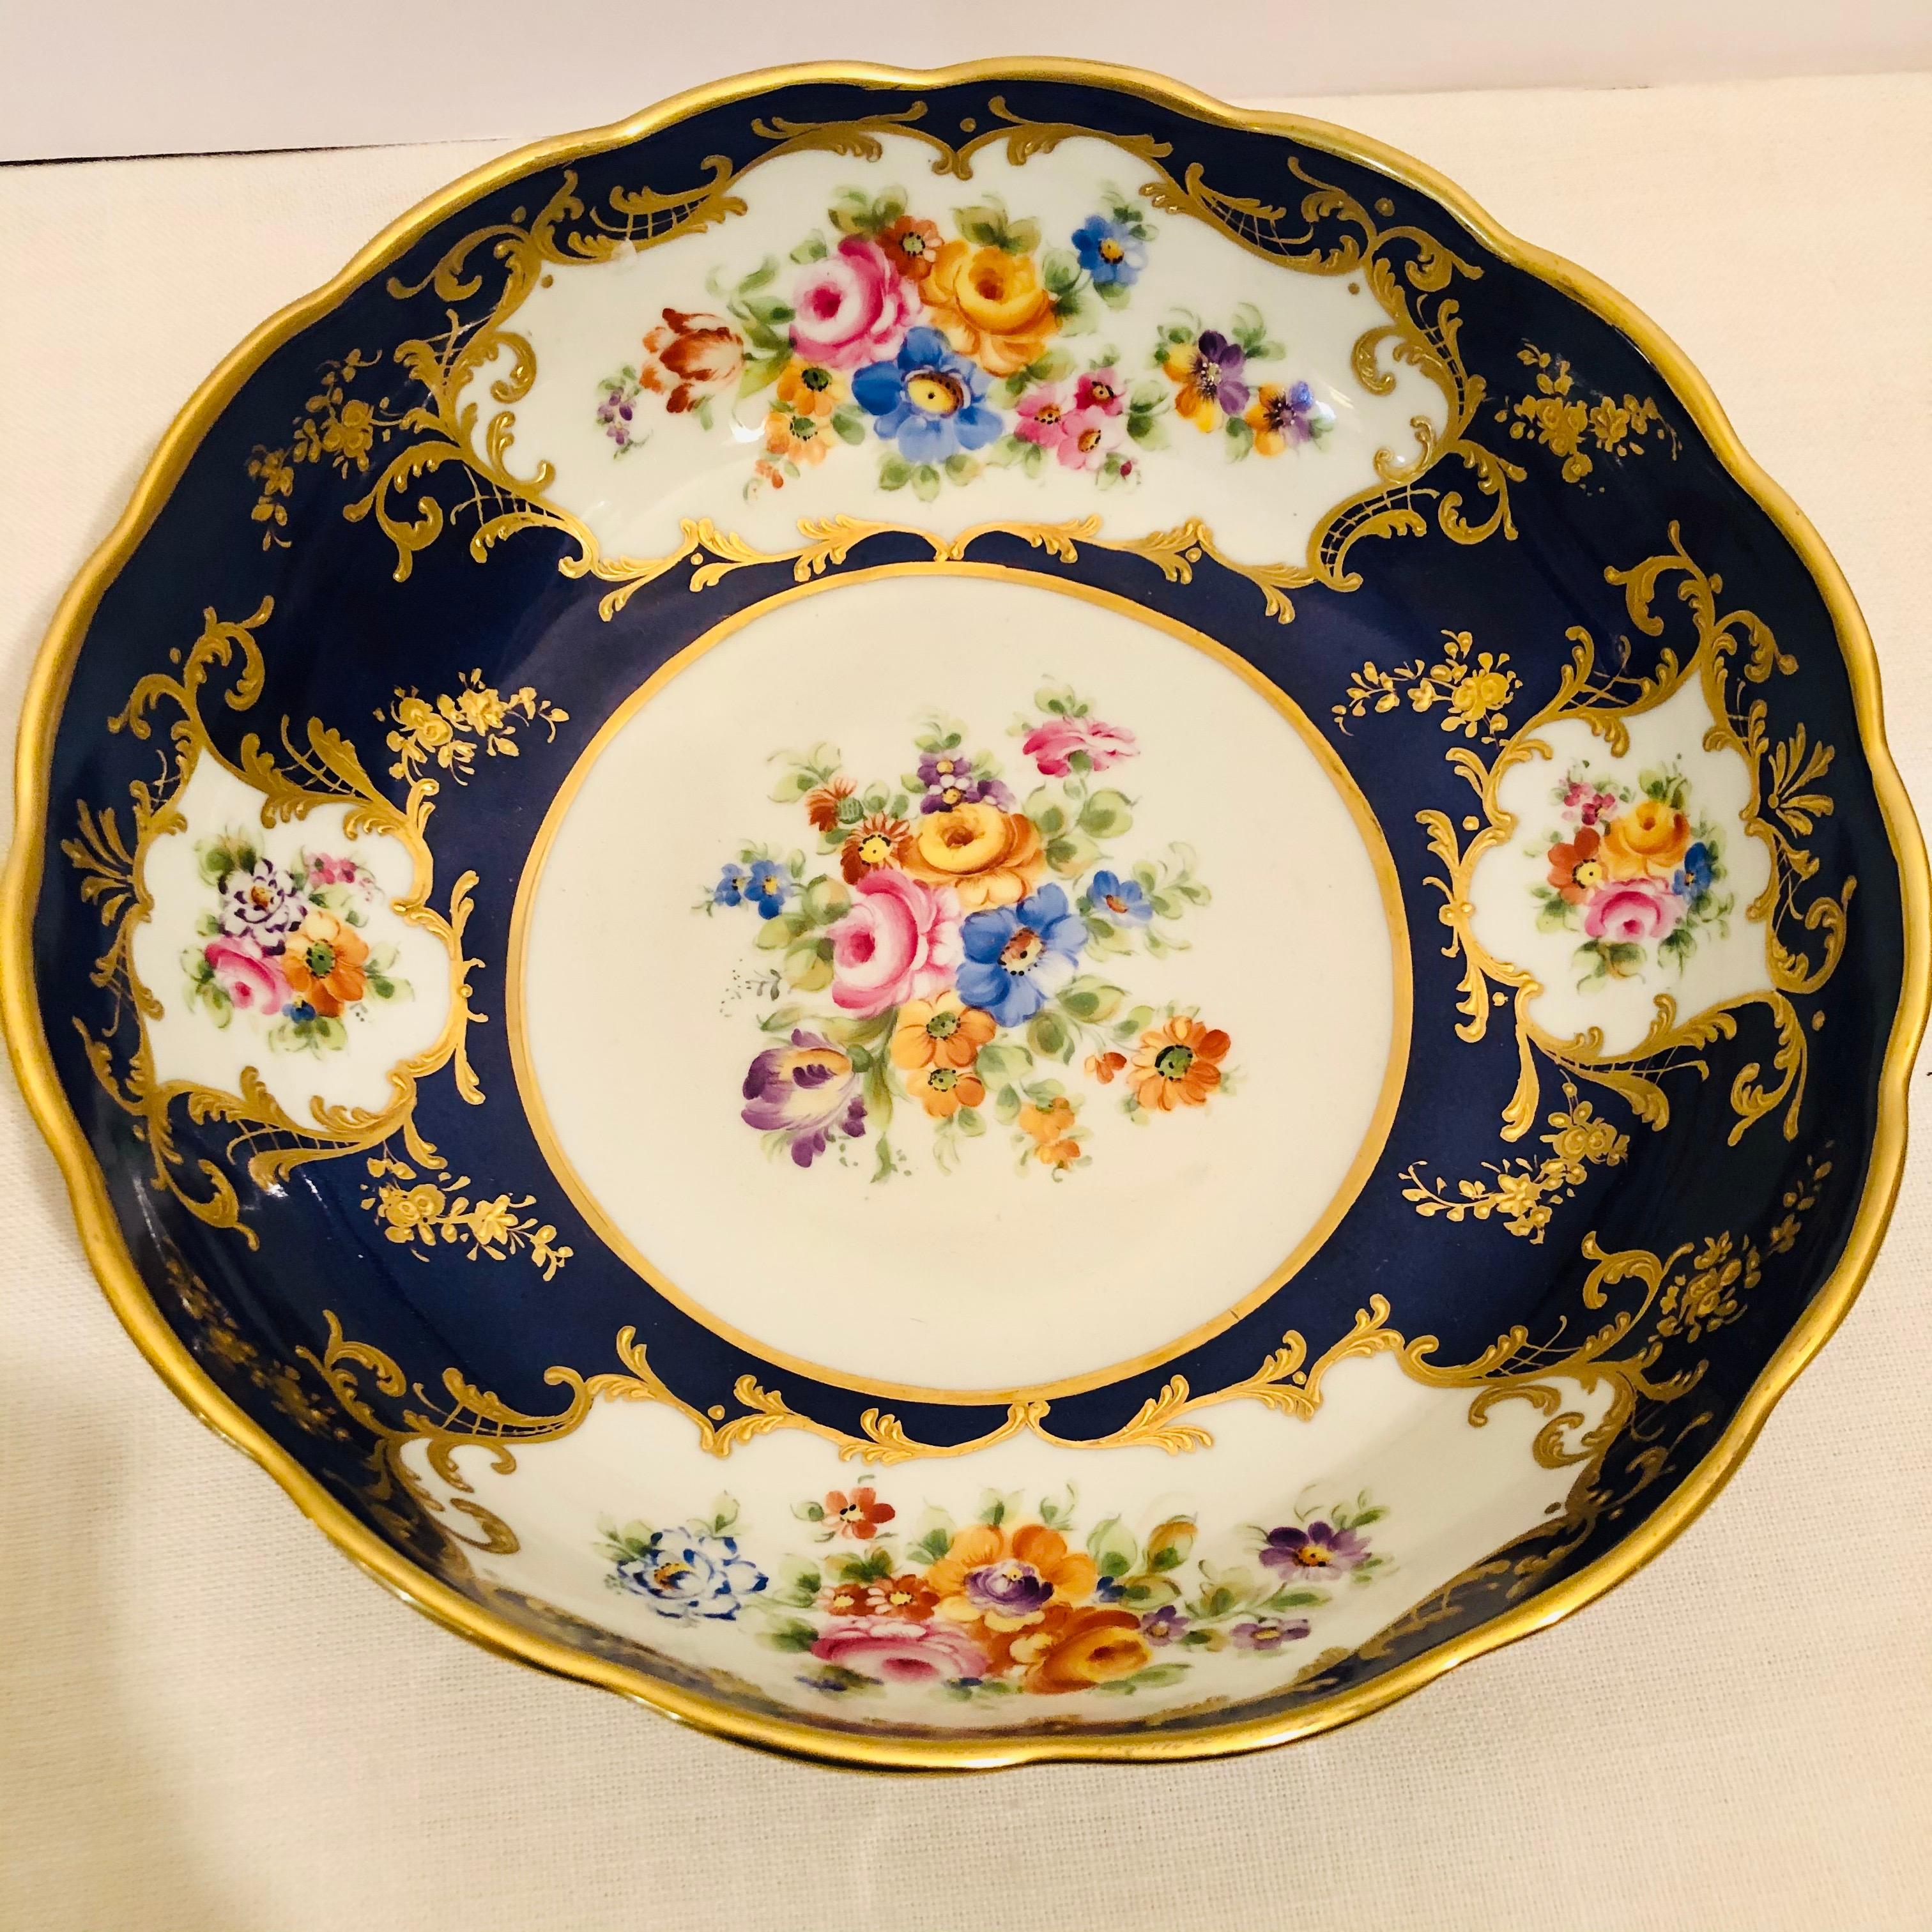 Le Tallec Blue Bowl with Painted Central Flower Bouquet and 4 Flower Medallions 2